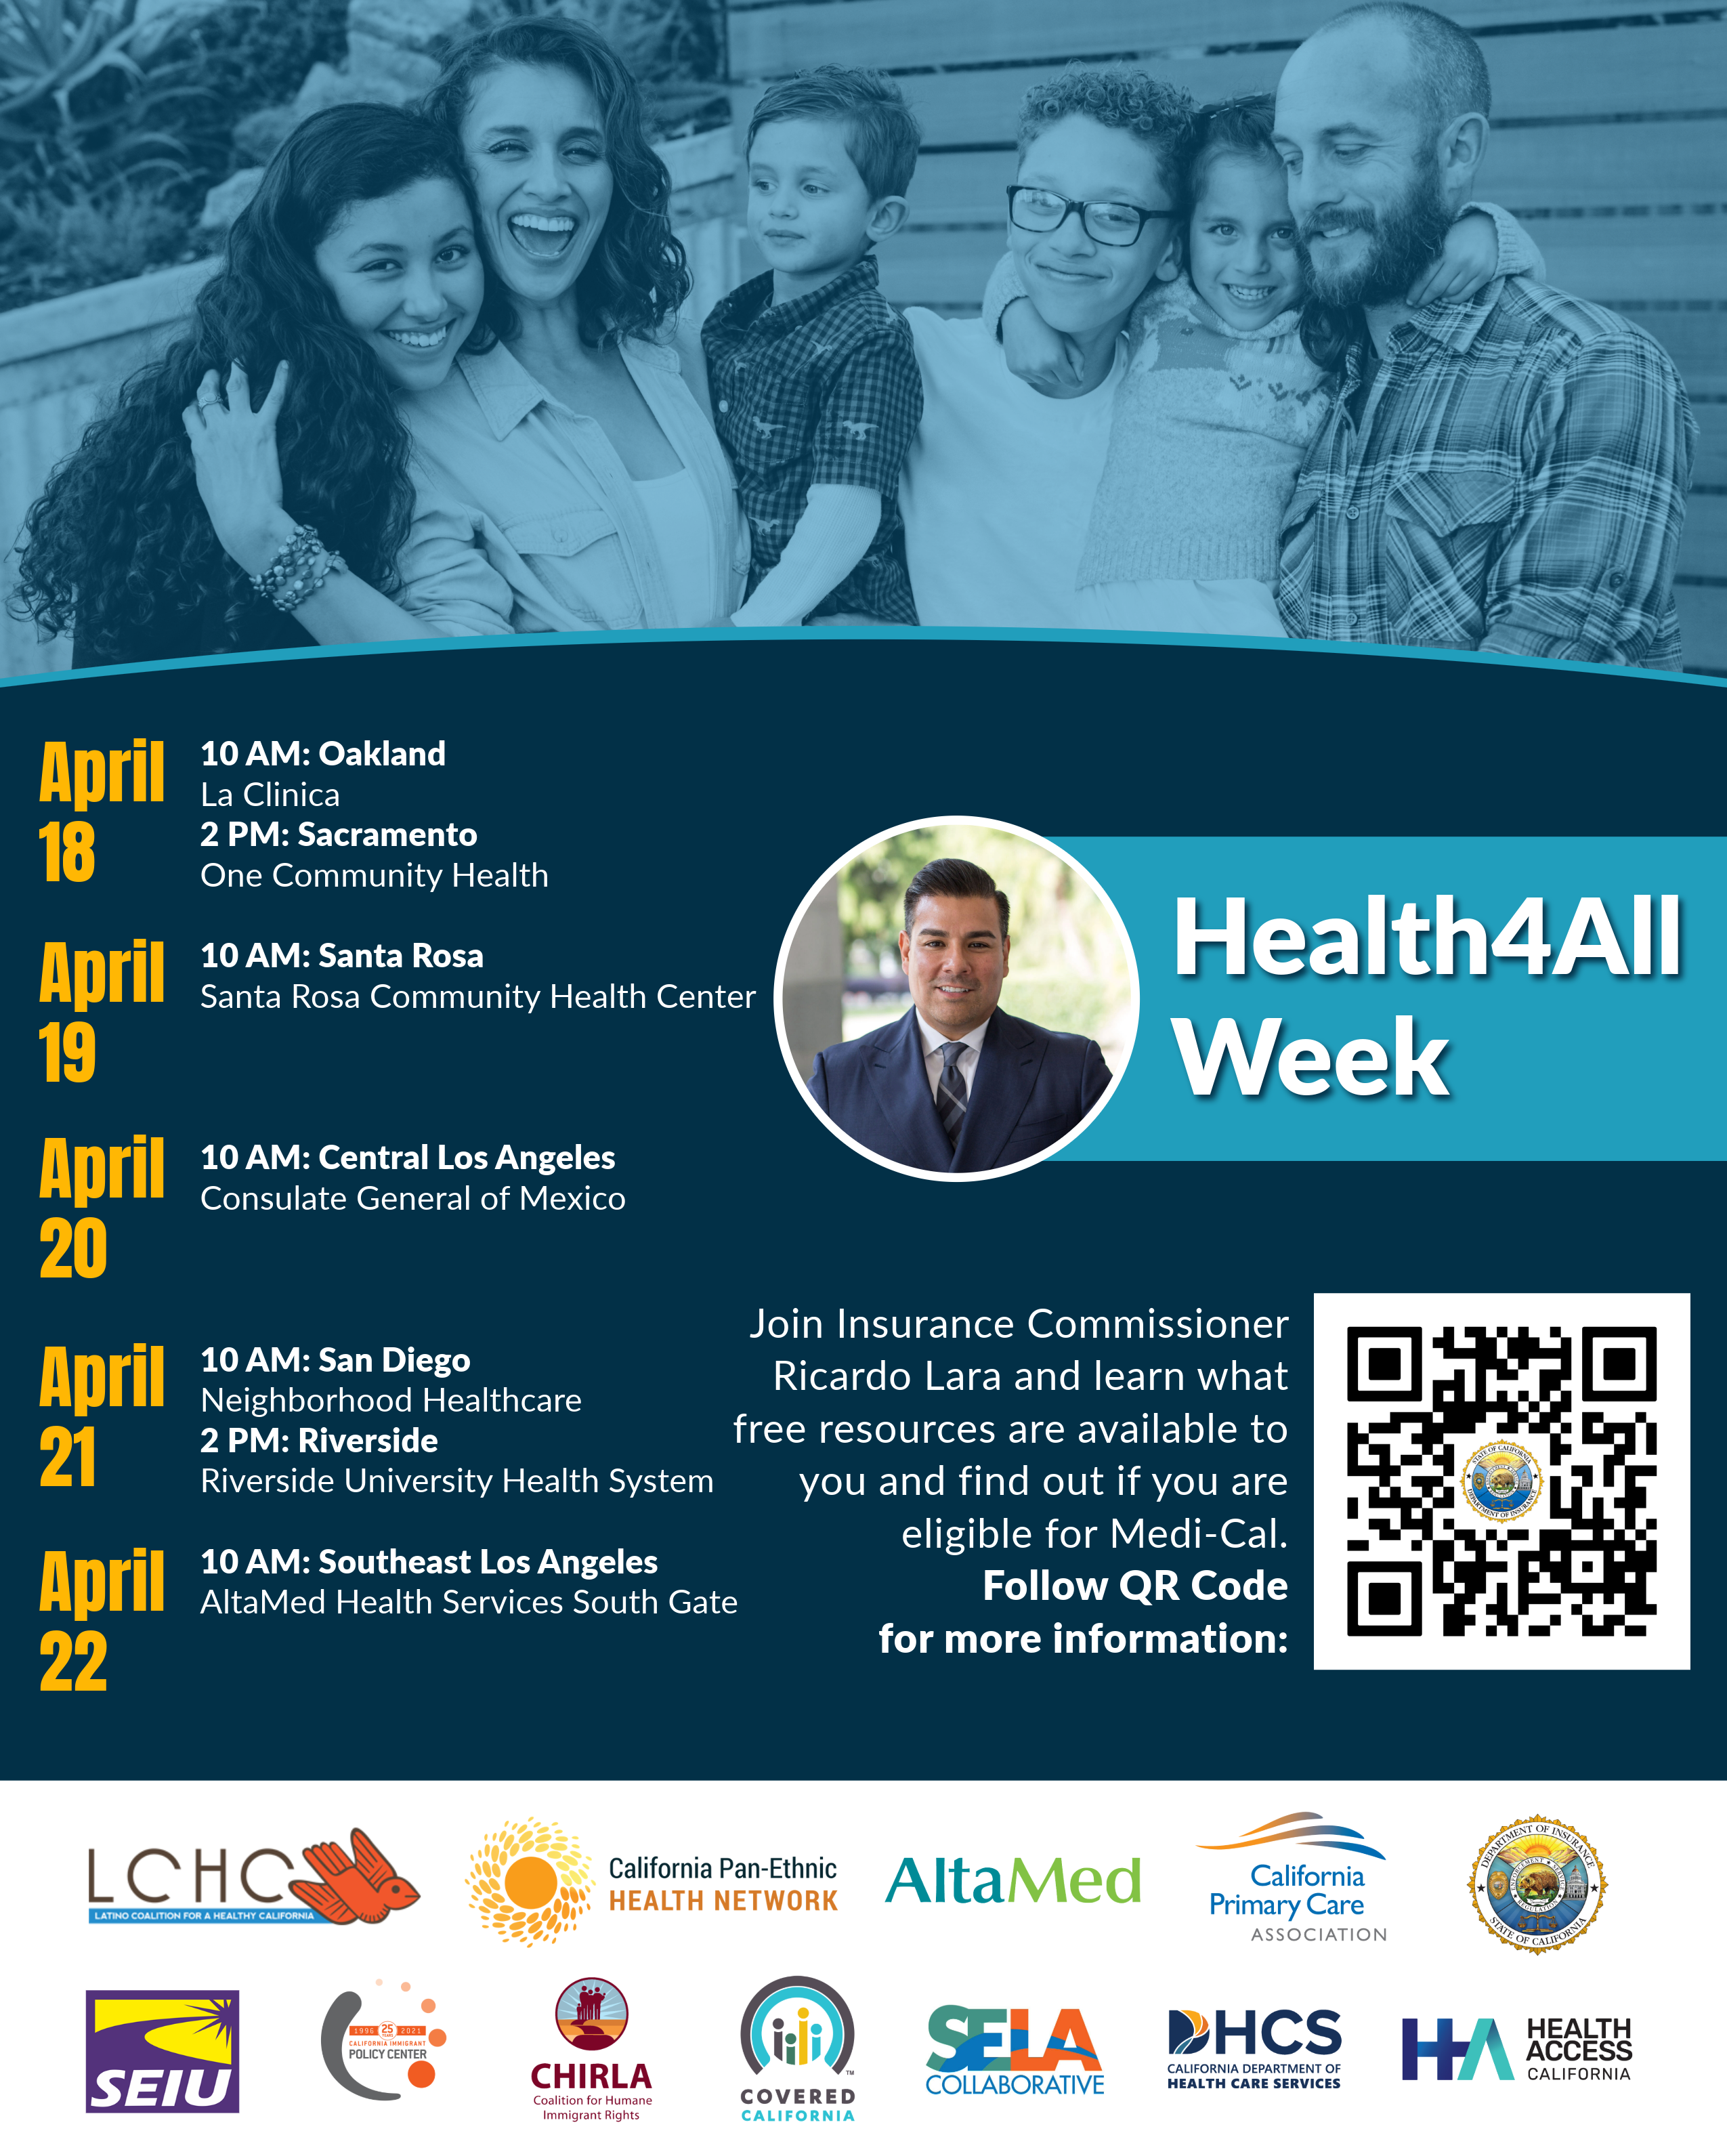 Health4All Week. Join Insurance Commissioner Ricardo Lara and learn what free resources are available to you and find out if you are eligible for Medi-Cal.